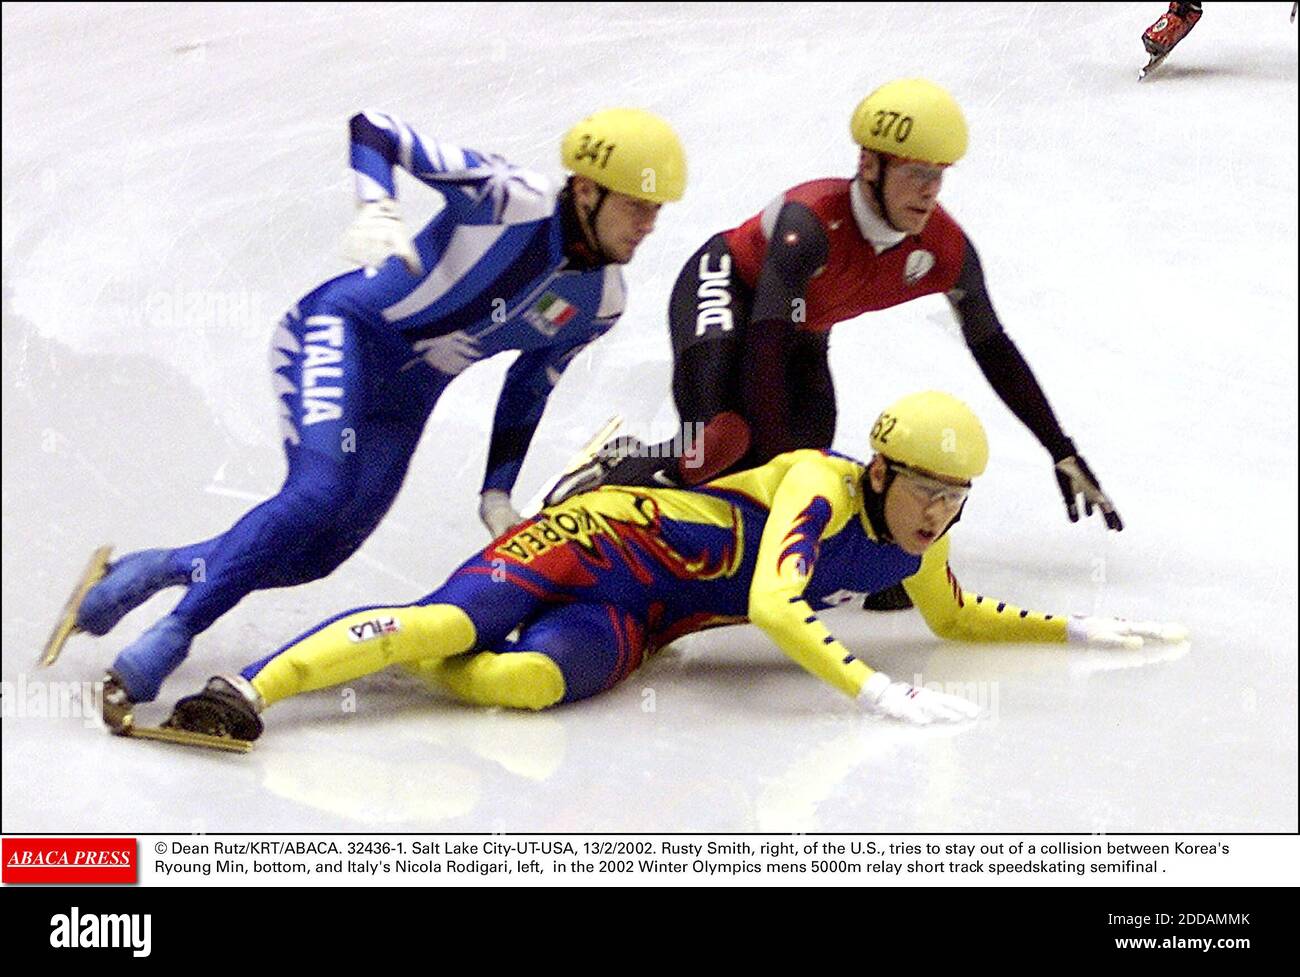 NO FILM, NO VIDEO, NO TV, NO DOCUMENTARY - © Dean Rutz/KRT/ABACA. 32436-1. Salt Lake City-UT-USA, 13/2/2002. Rusty Smith, right, of the U.S., tries to stay out of a collision between Korea's Ryoung Min, bottom, and Italy's Nicola Rodigari, left, in the 2002 Winter Olympics mens 5000m relay short t Stock Photo